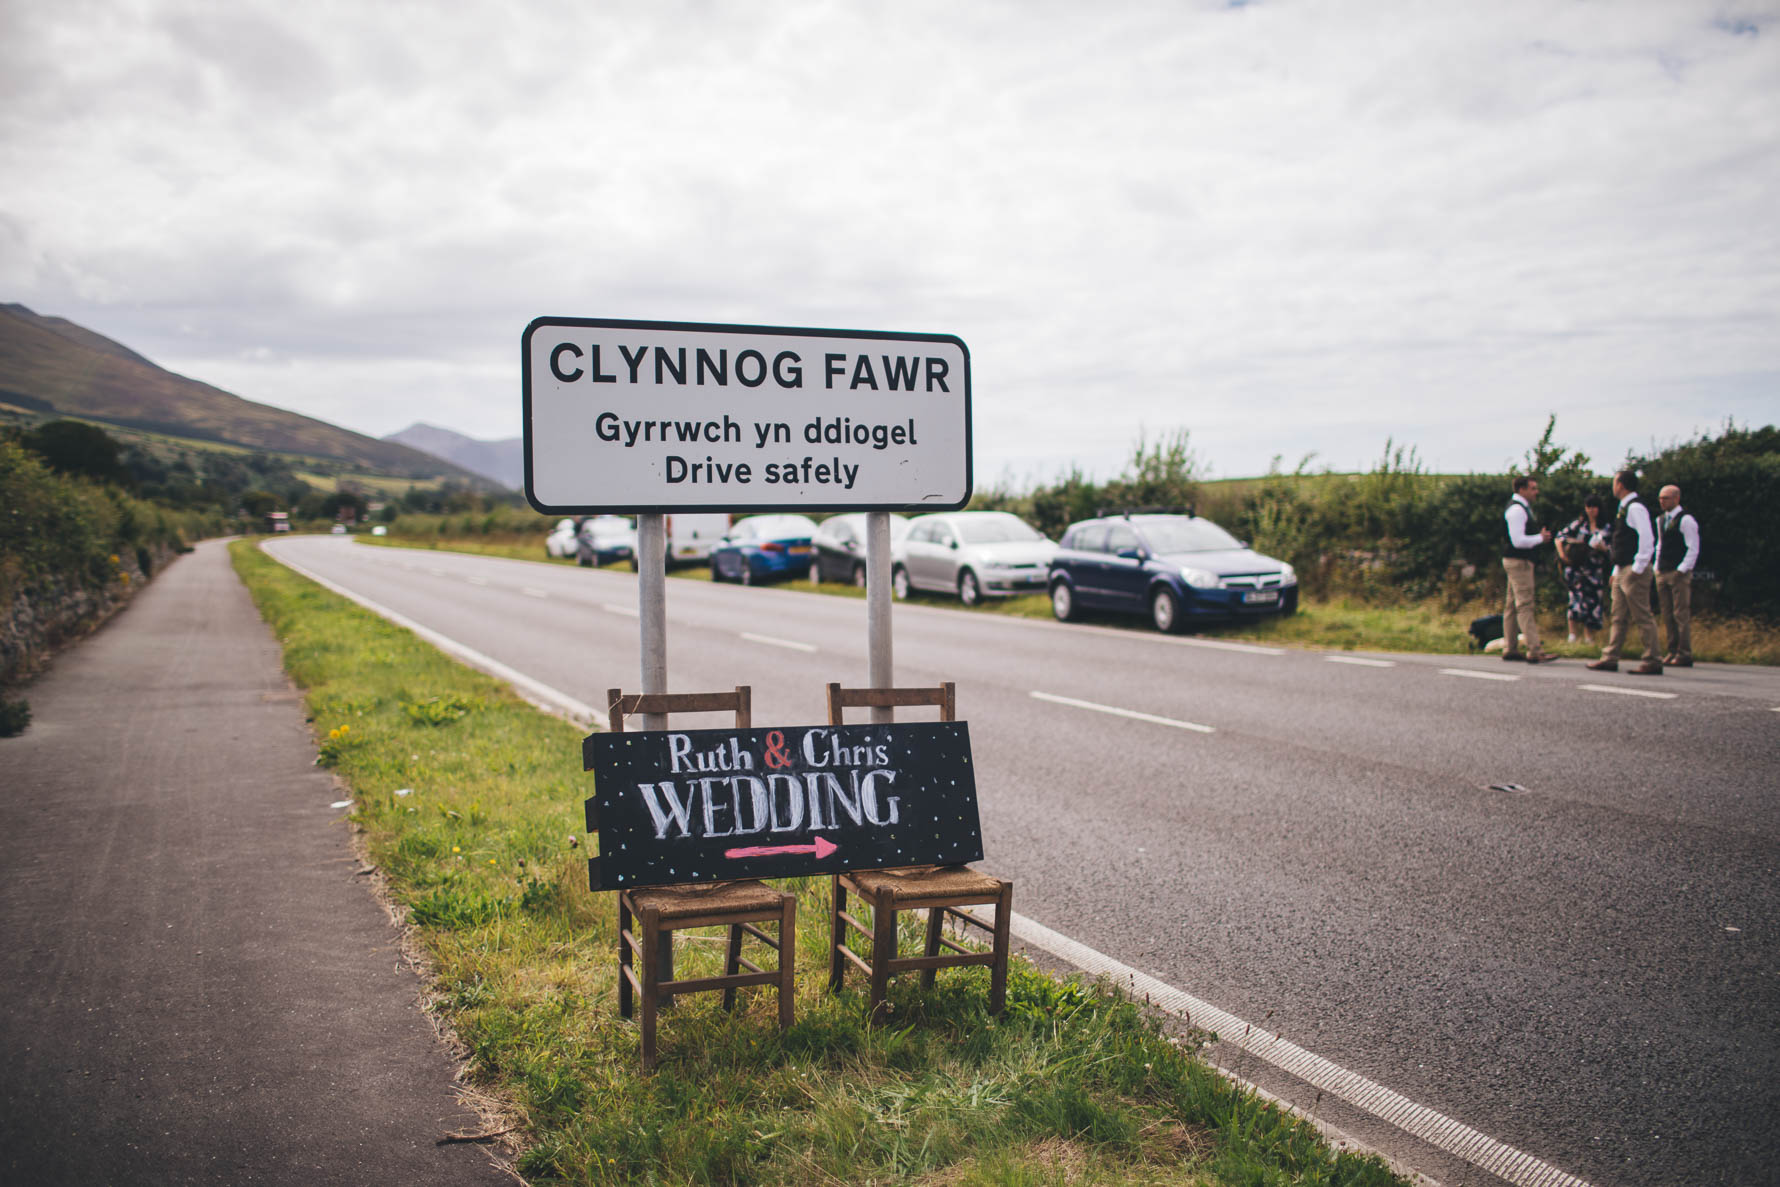 Road sign with a chalk board below announcing Ruth & Chris' wedding with an arrow pointing to the right which is sat on two chairs. There are cars parked up on the right ha=nd side of the road and four wedding guests stood in front of the cars